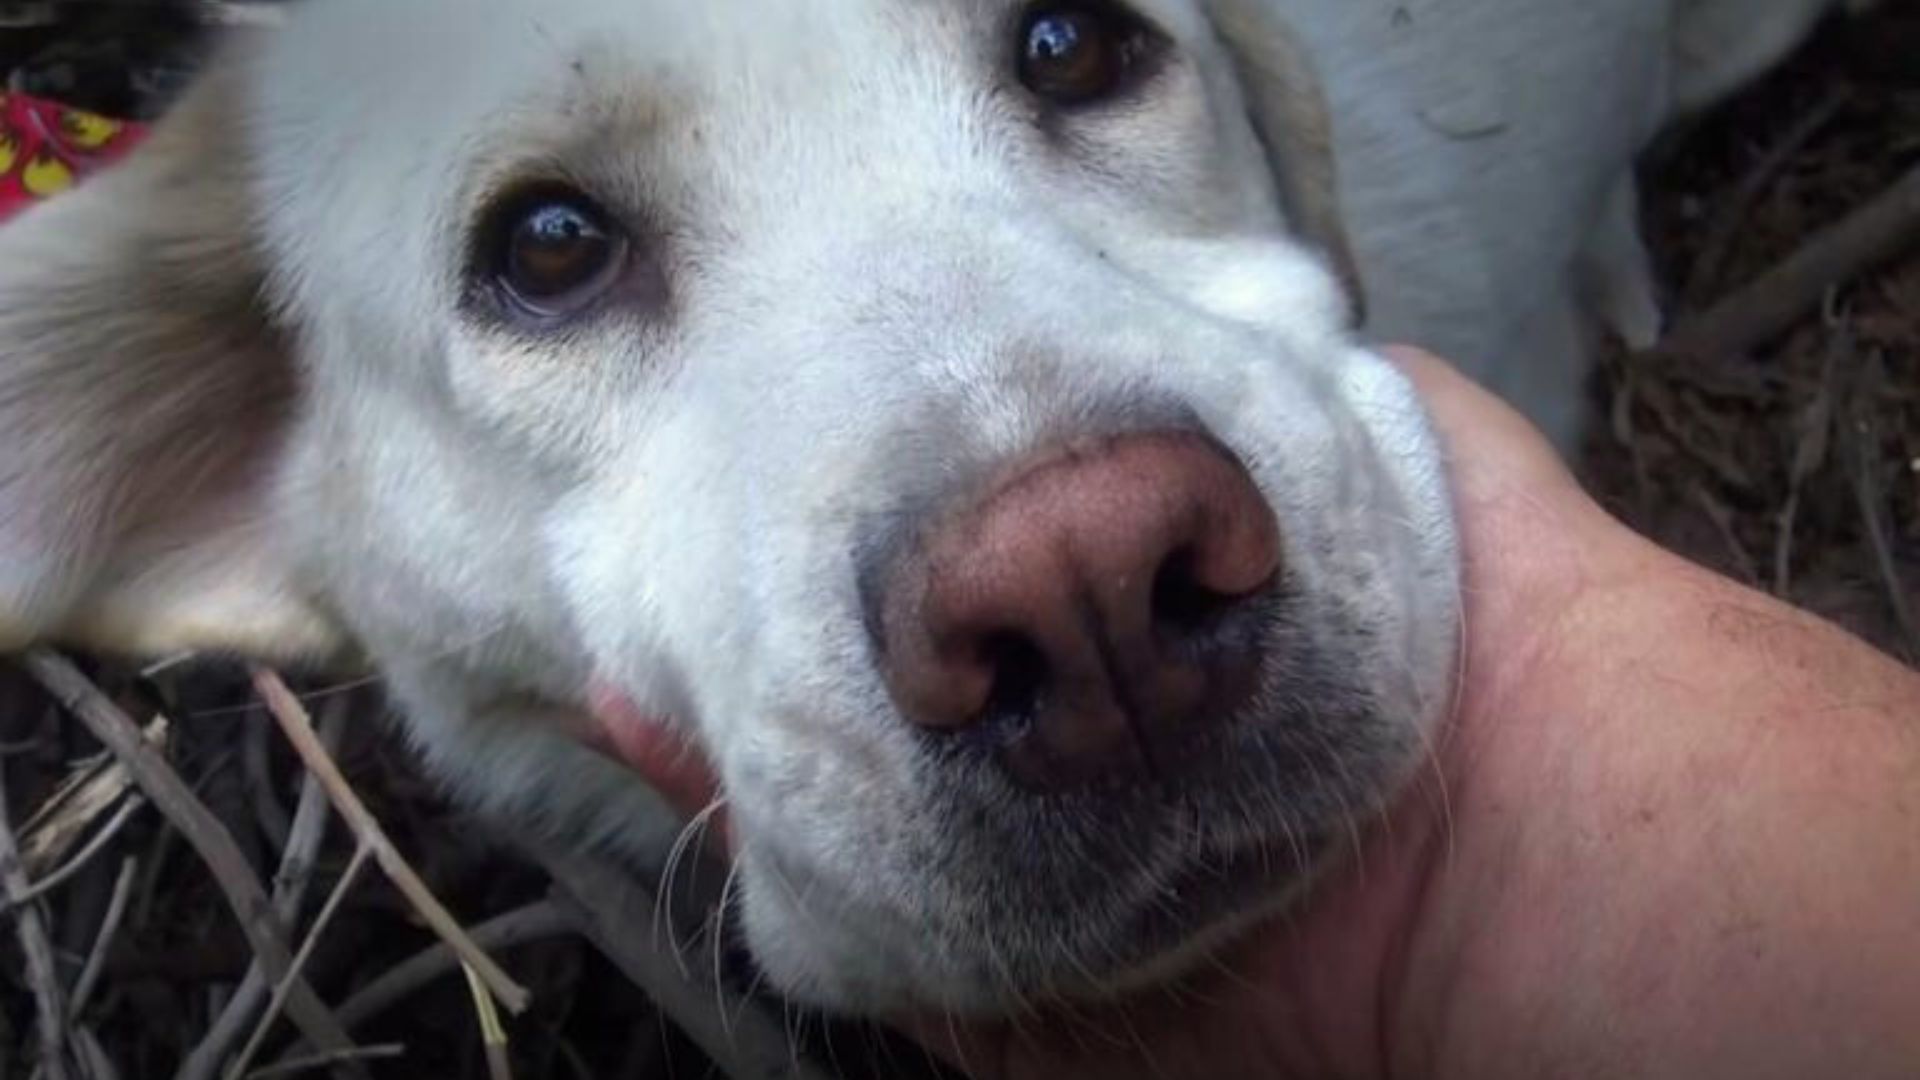 Mama Dog Showed Her Rescuers The Sweetest Smile When She Got Reunited With Her Babies